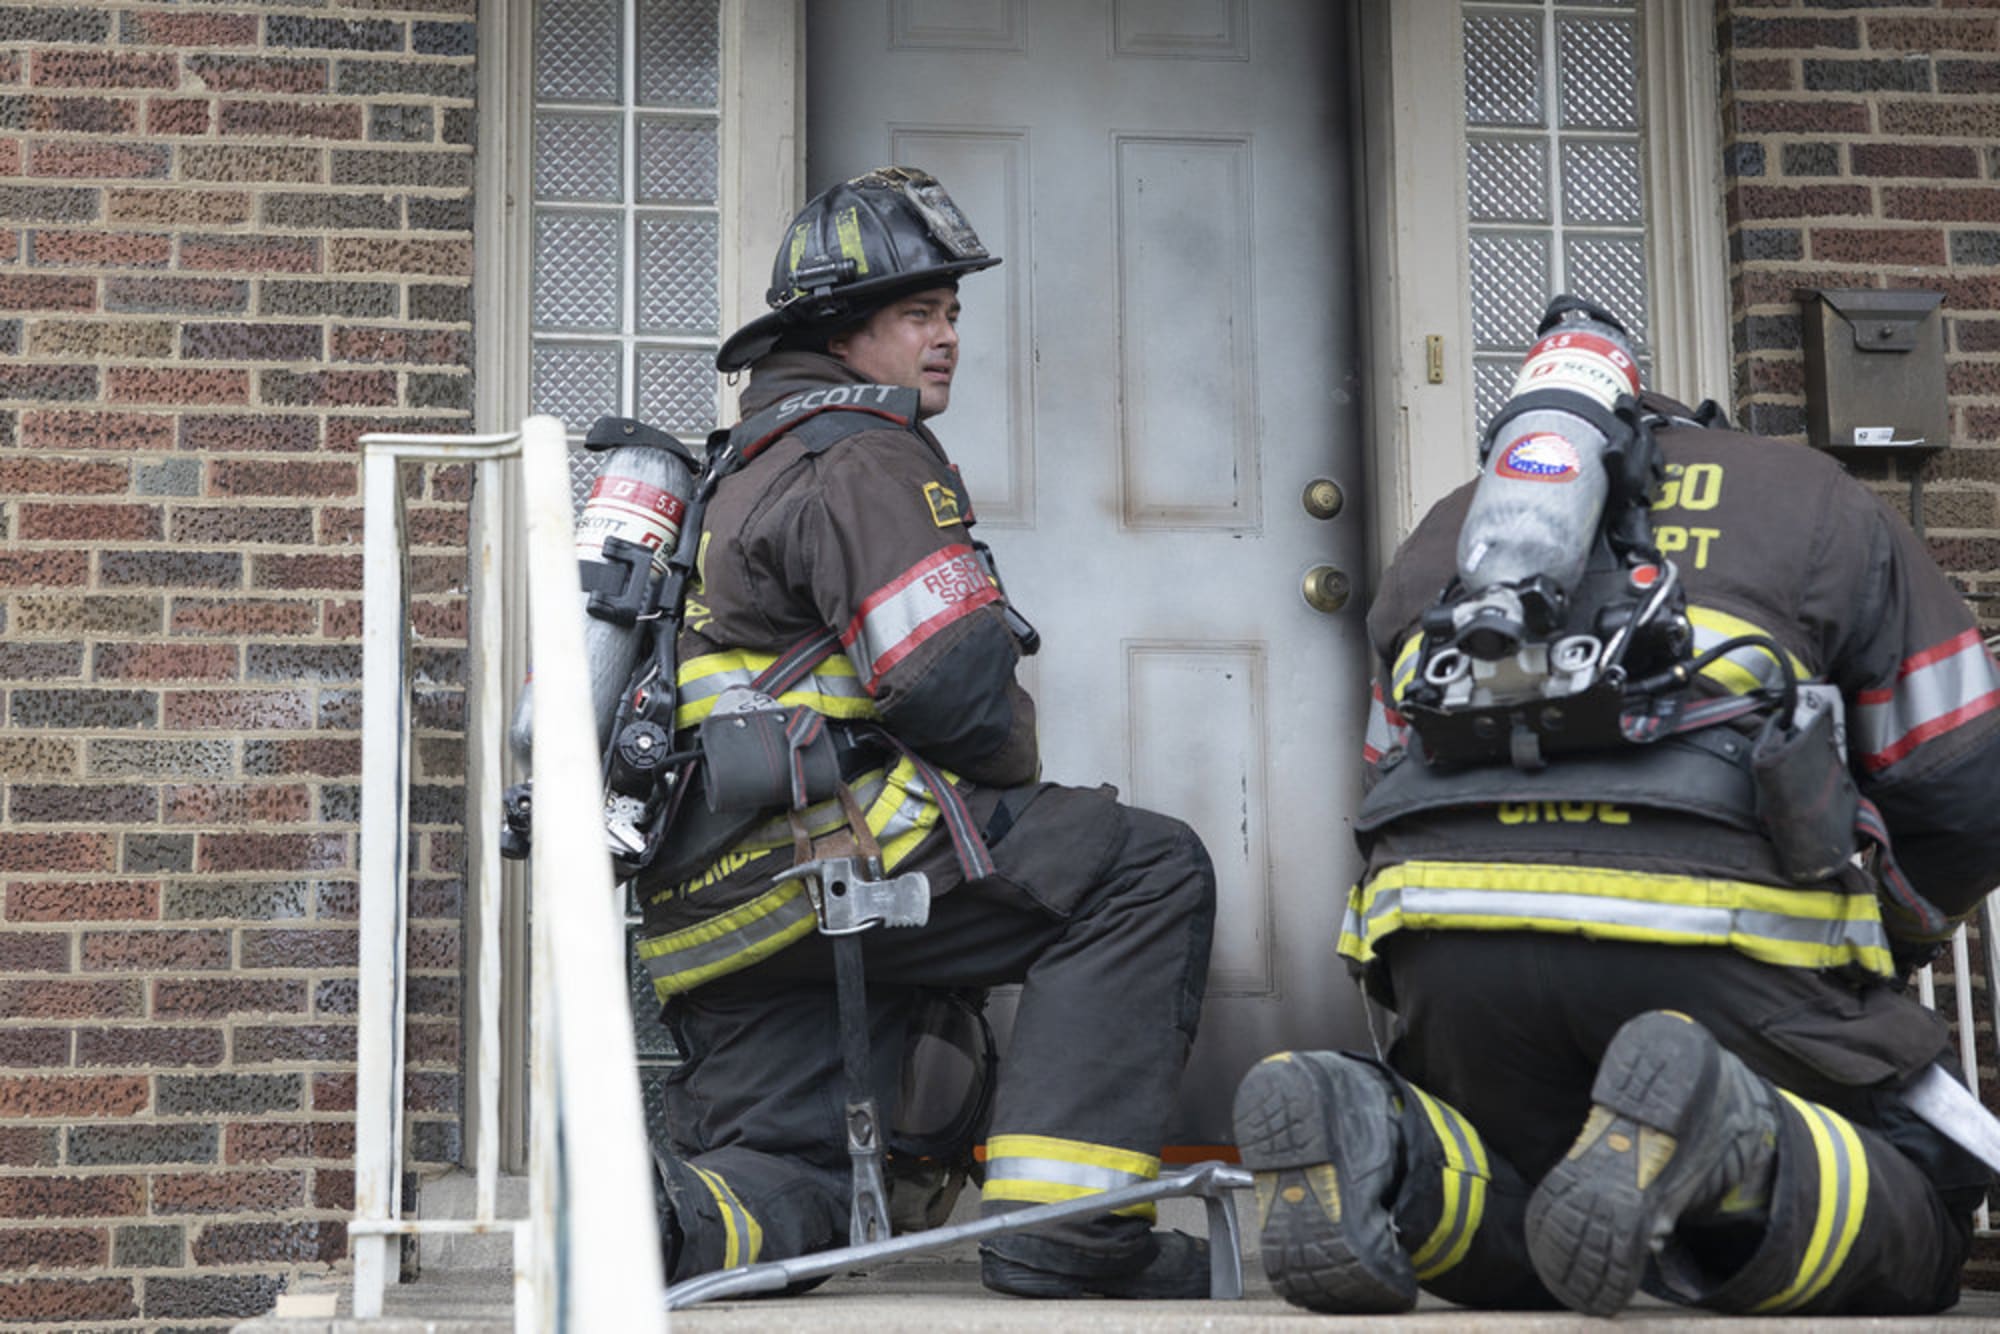 Chicago Fire season 8, episode 6 preview: What Went Wrong